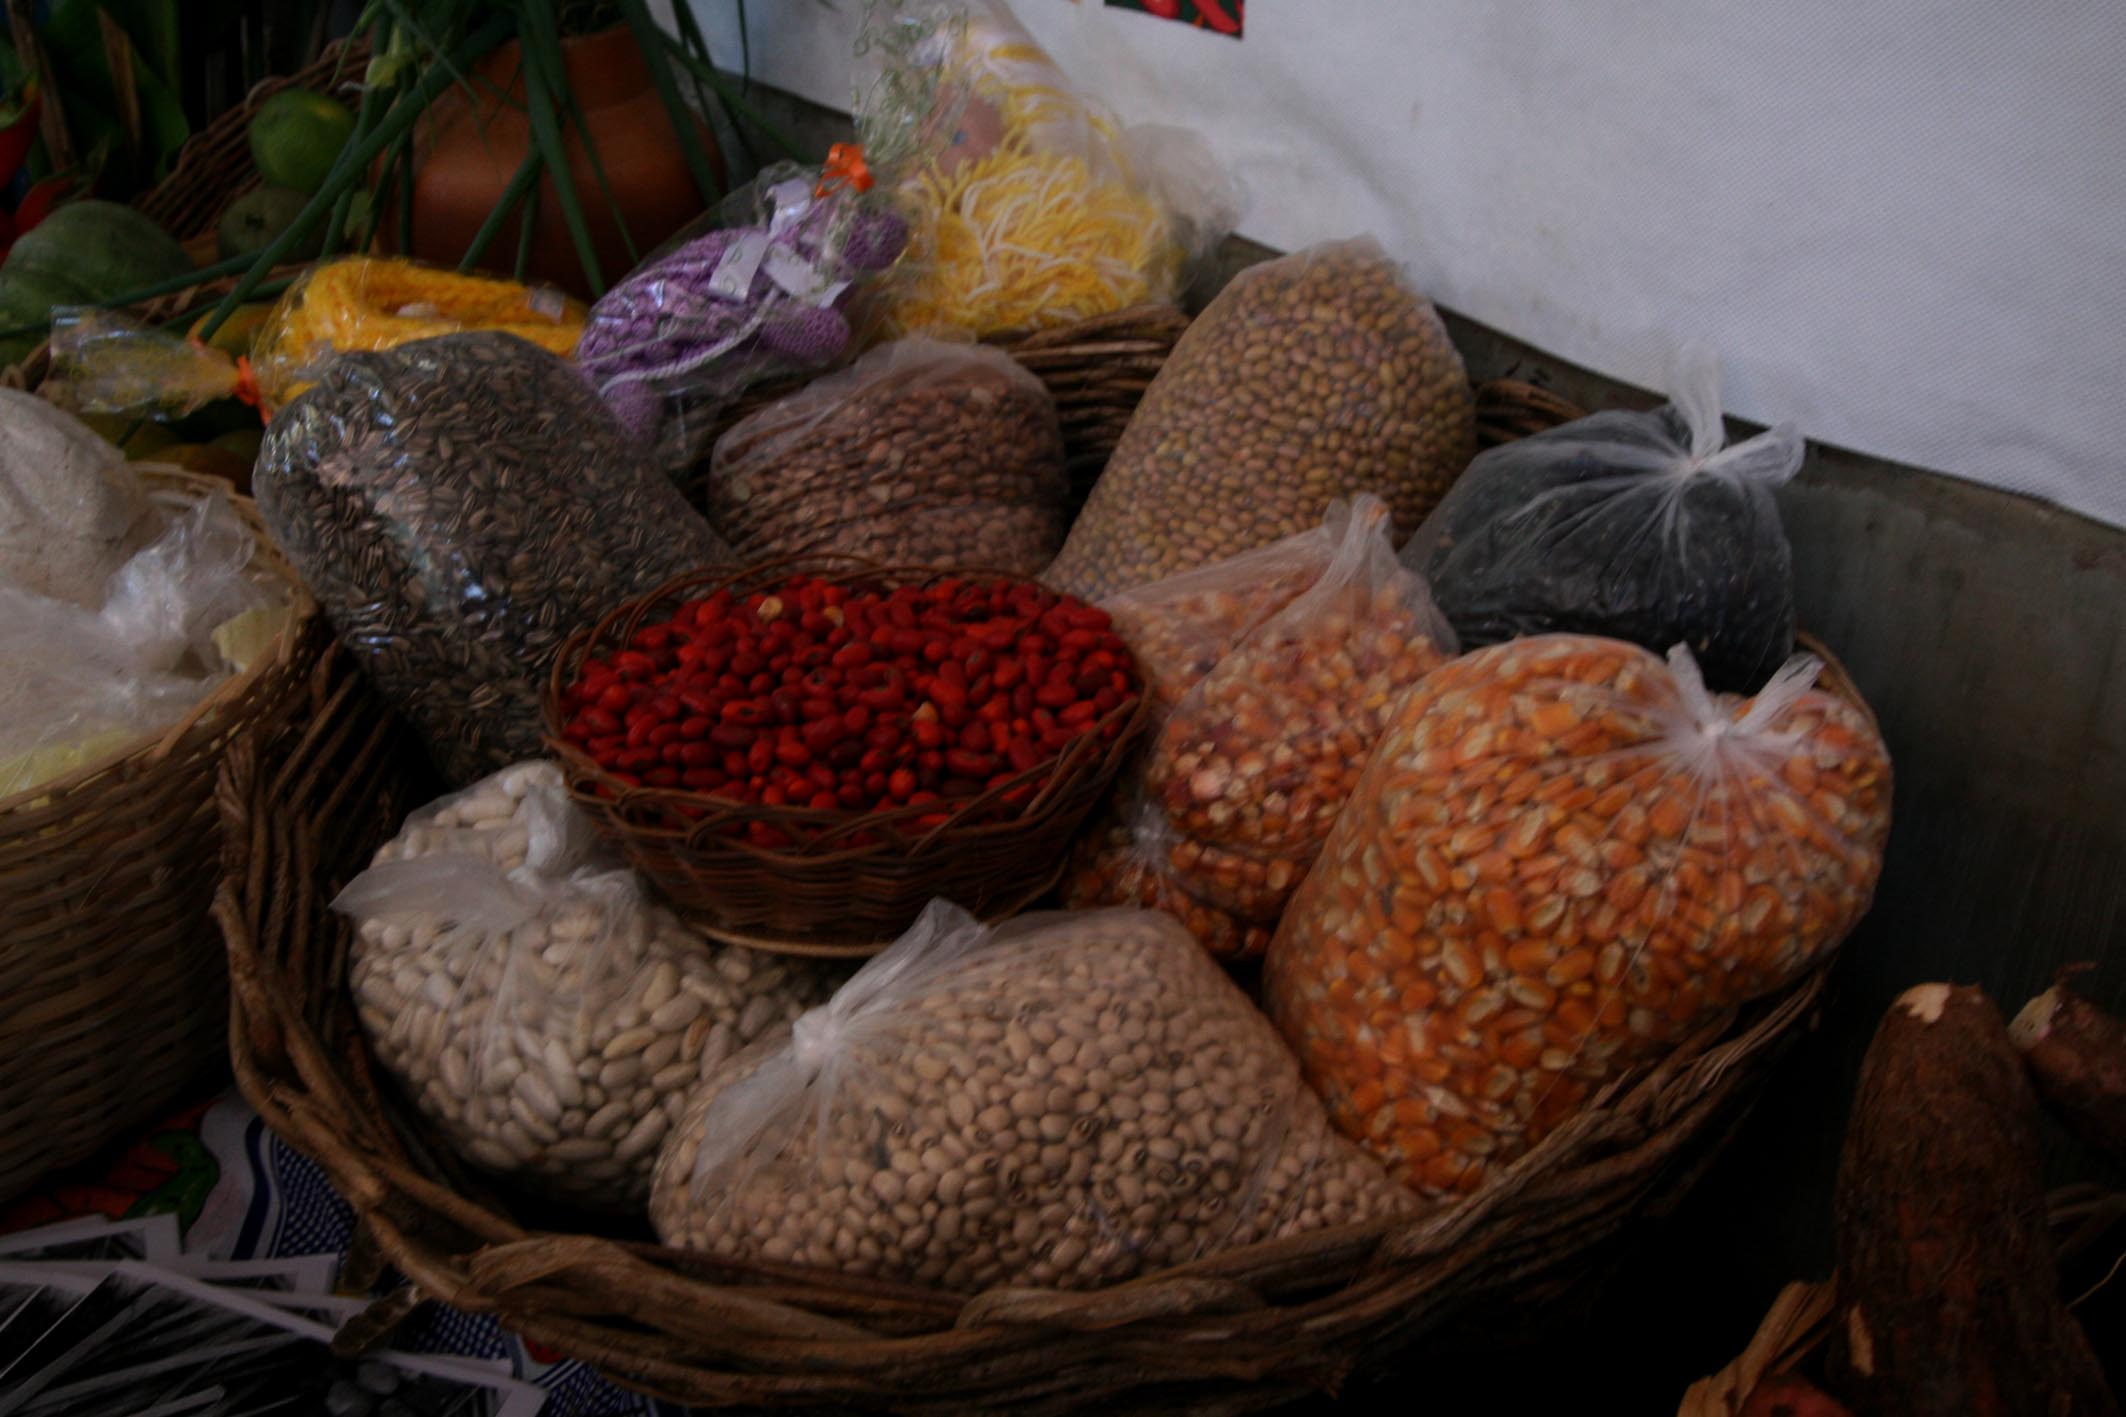 baskets filled with bean and rice items in a market